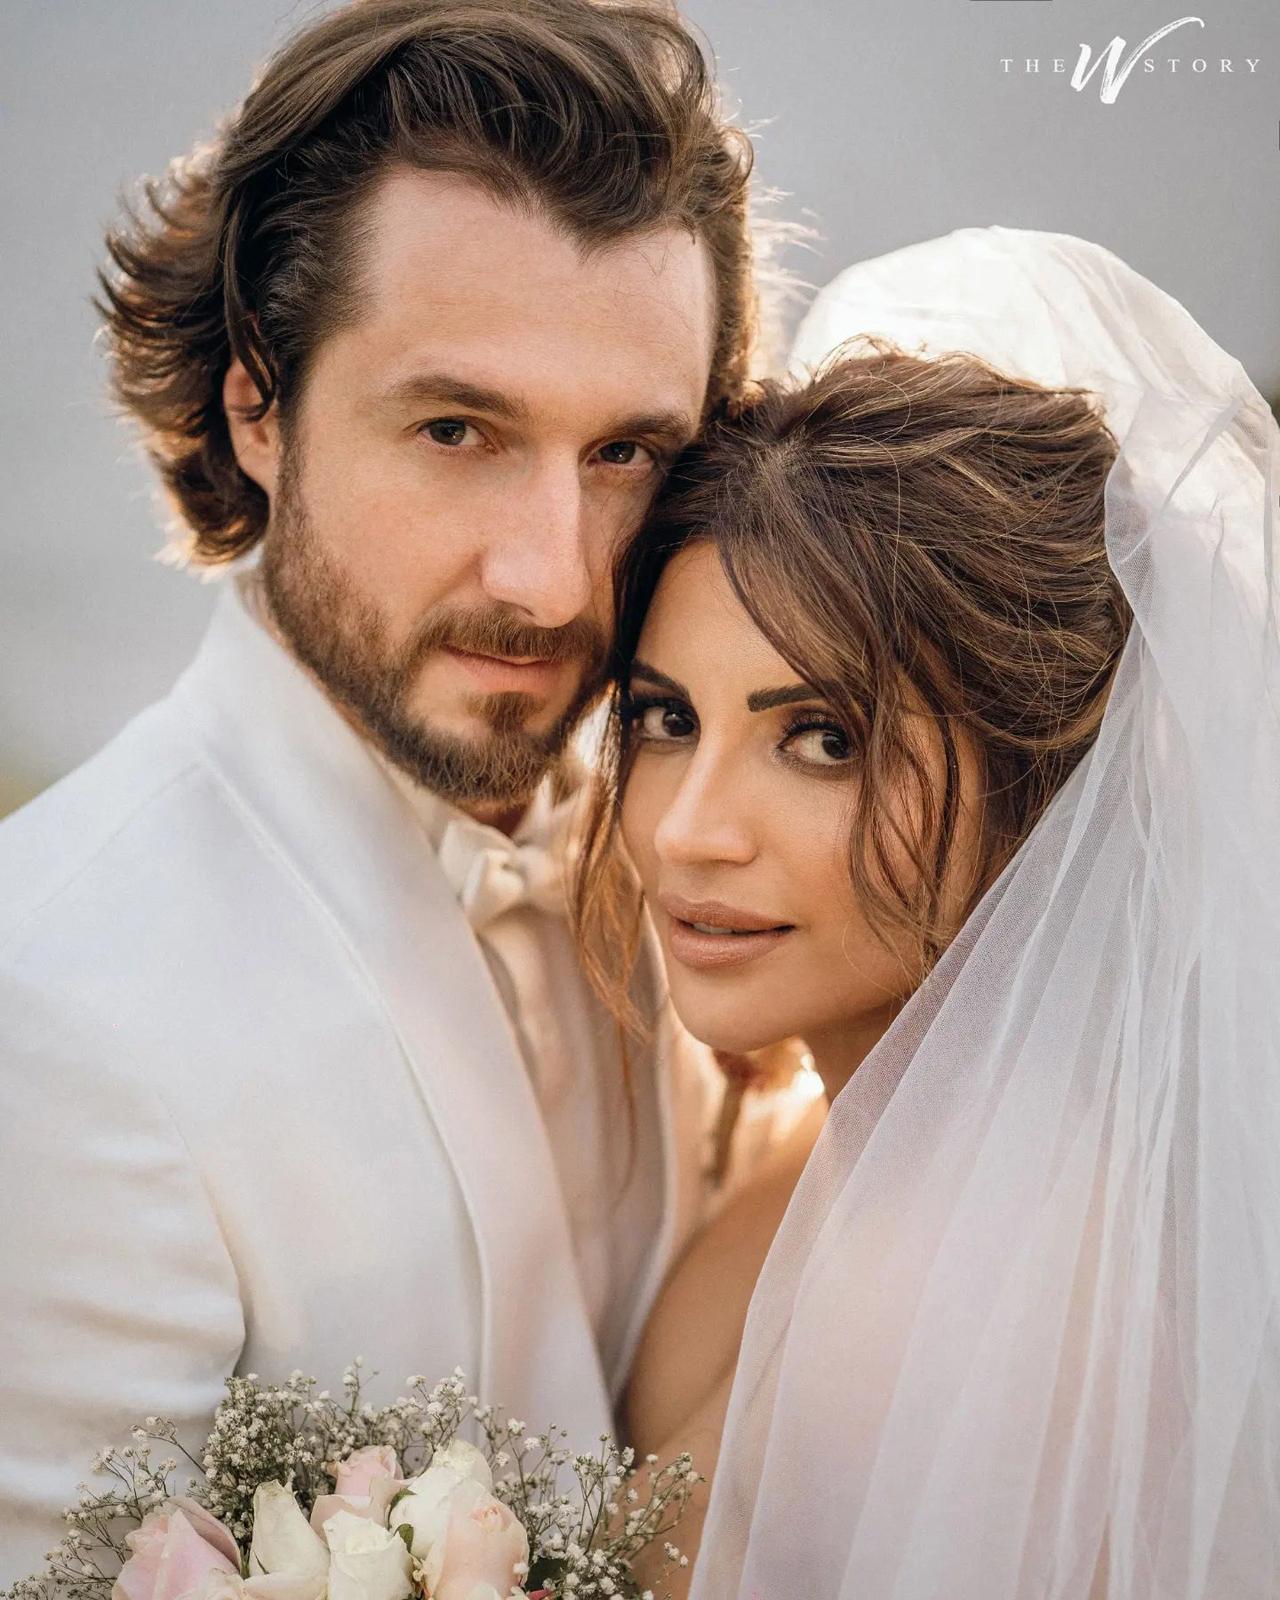 After dating for years, actor Shama Sikander exchanged vows with beau James Milliron in Goa on March 14, 2022. Before this, the actress gave us all a glimpse of her Bachelorette party with her BFFs.